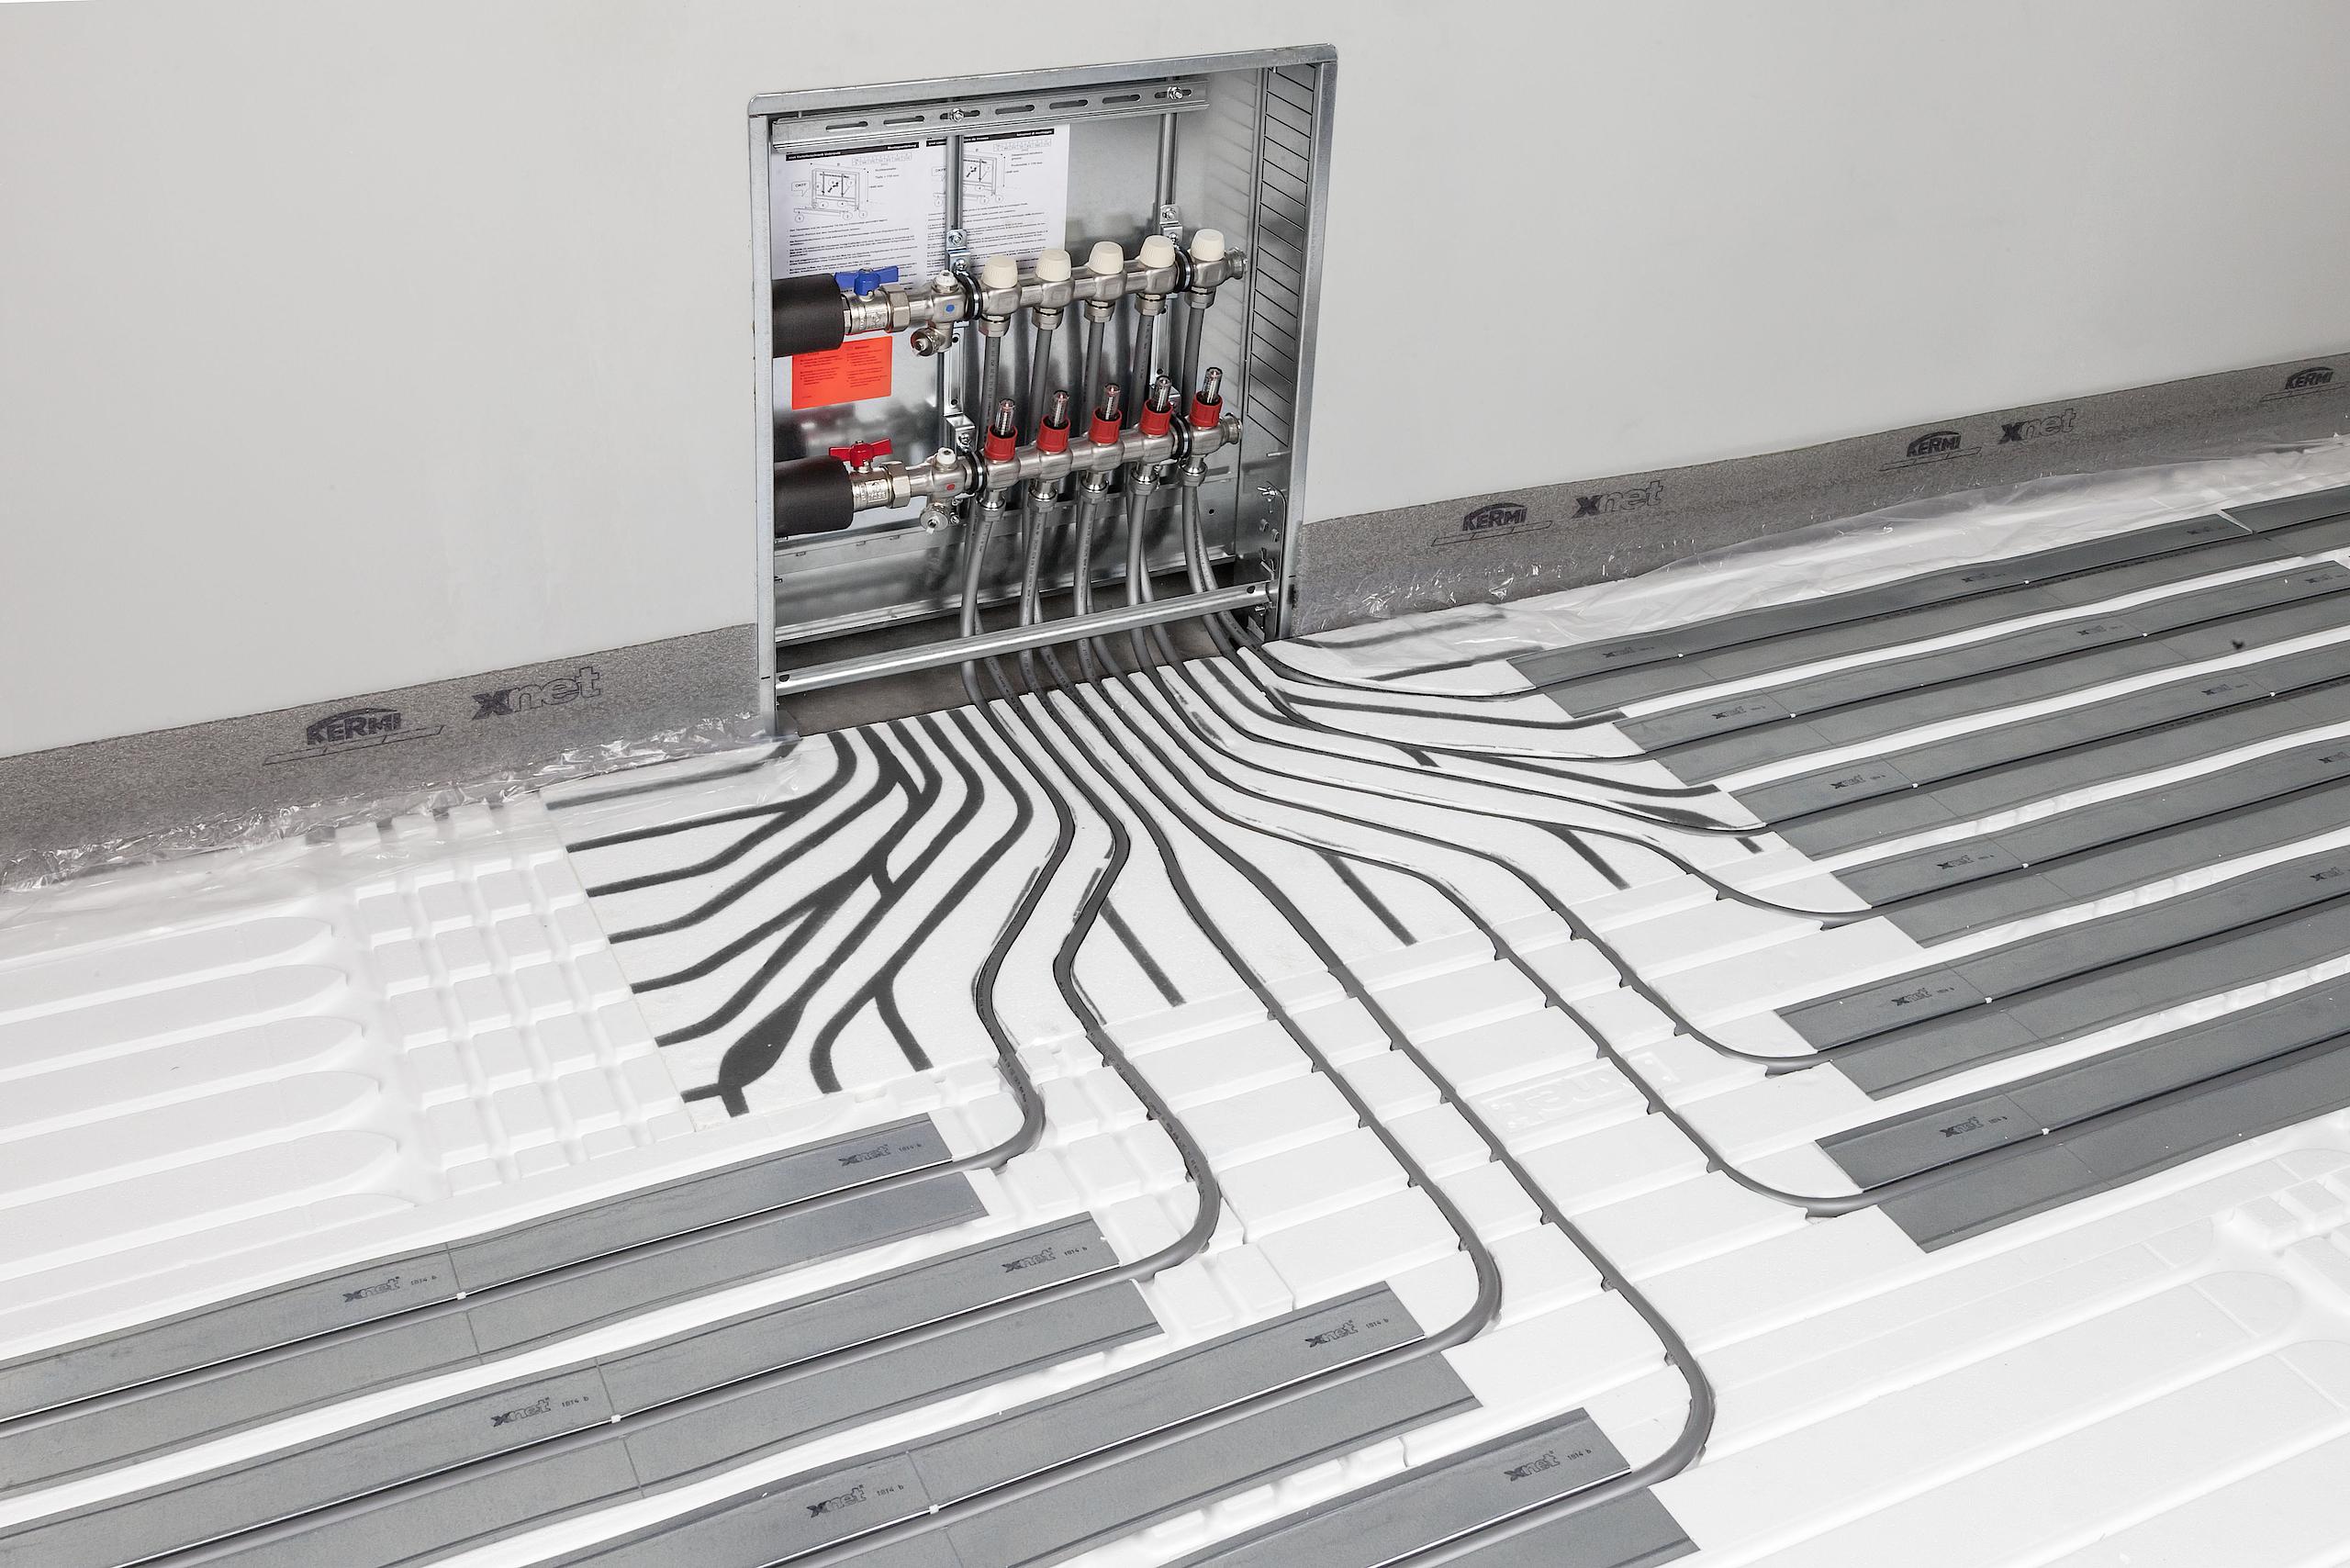 x-net C13 dry system – detailed solution for routing pipes in the manifold connection area